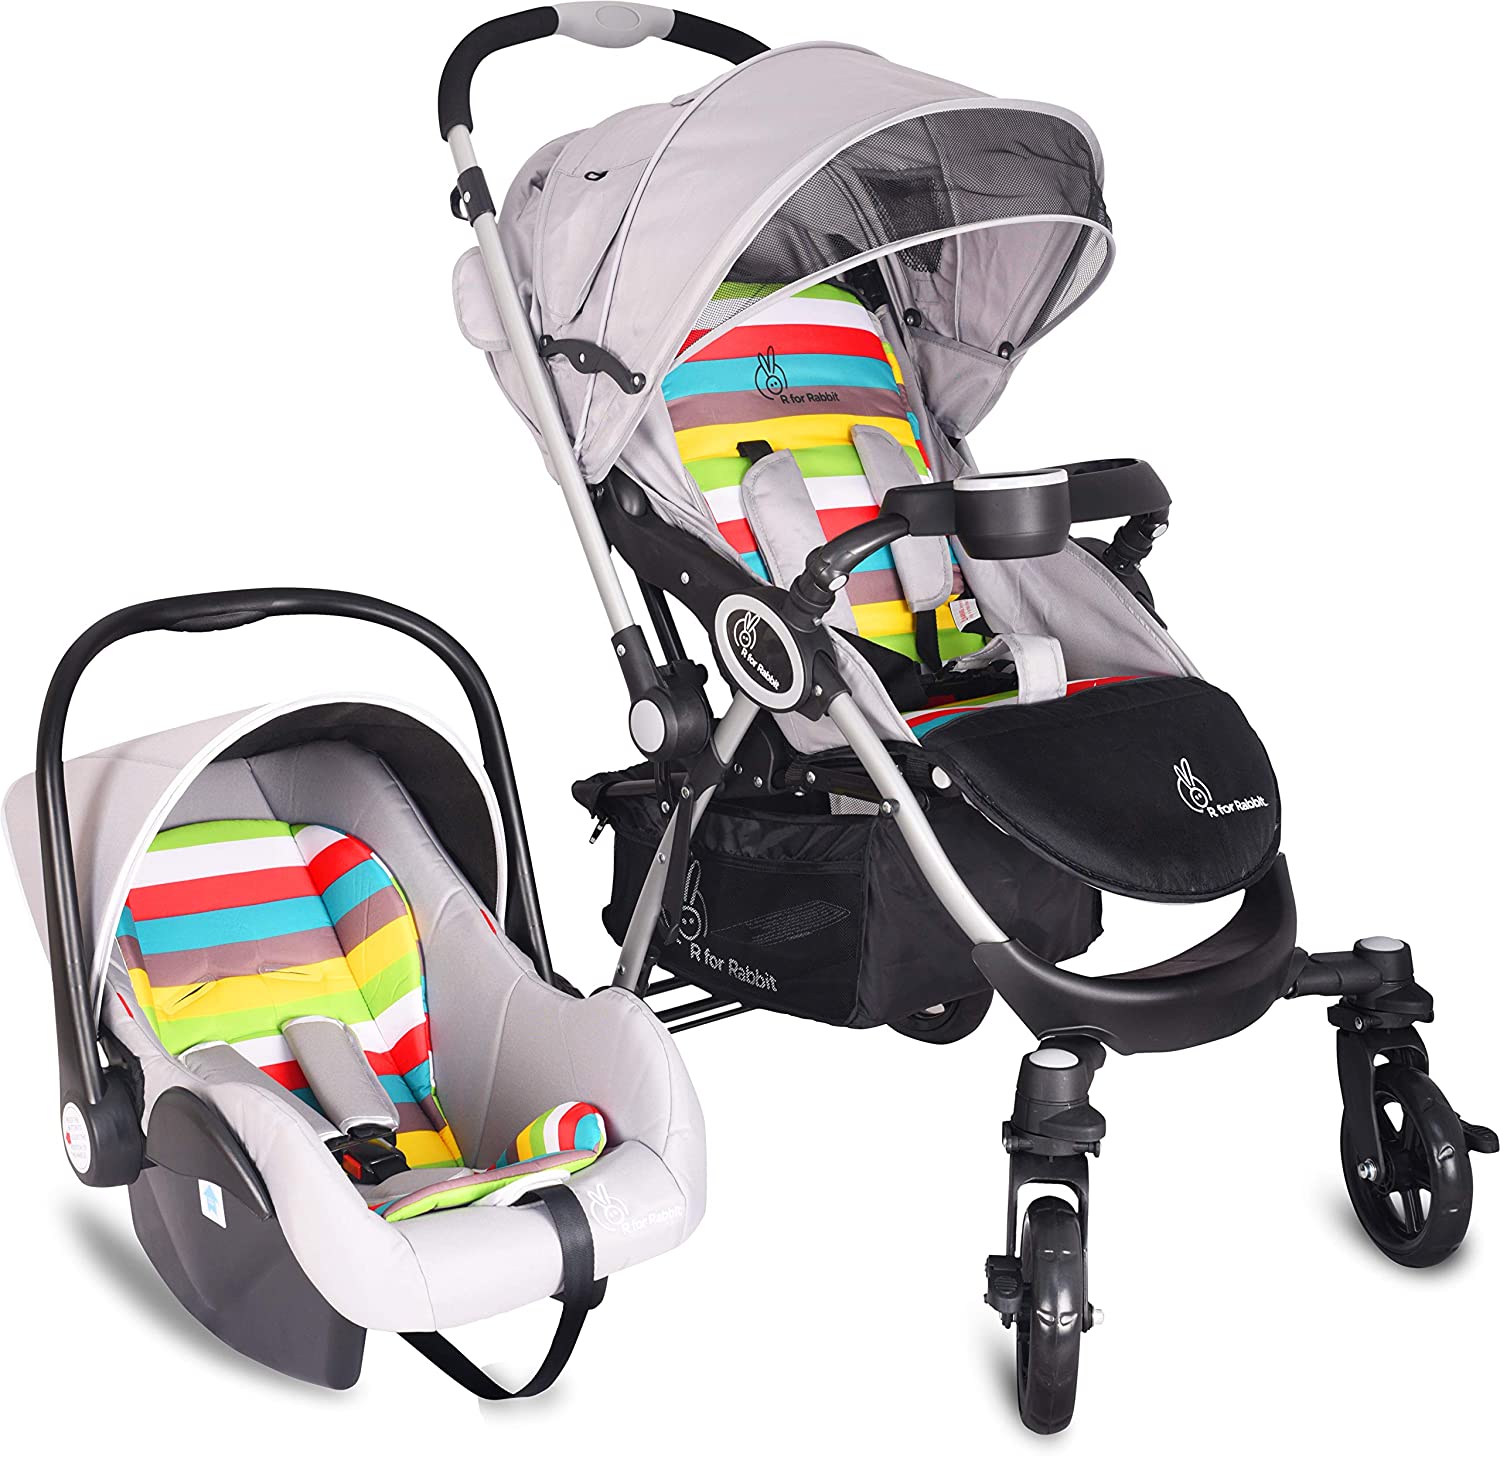 R for Rabbit Travel System - Chocolate Ride - Baby Stroller (Grey-Multicolor)